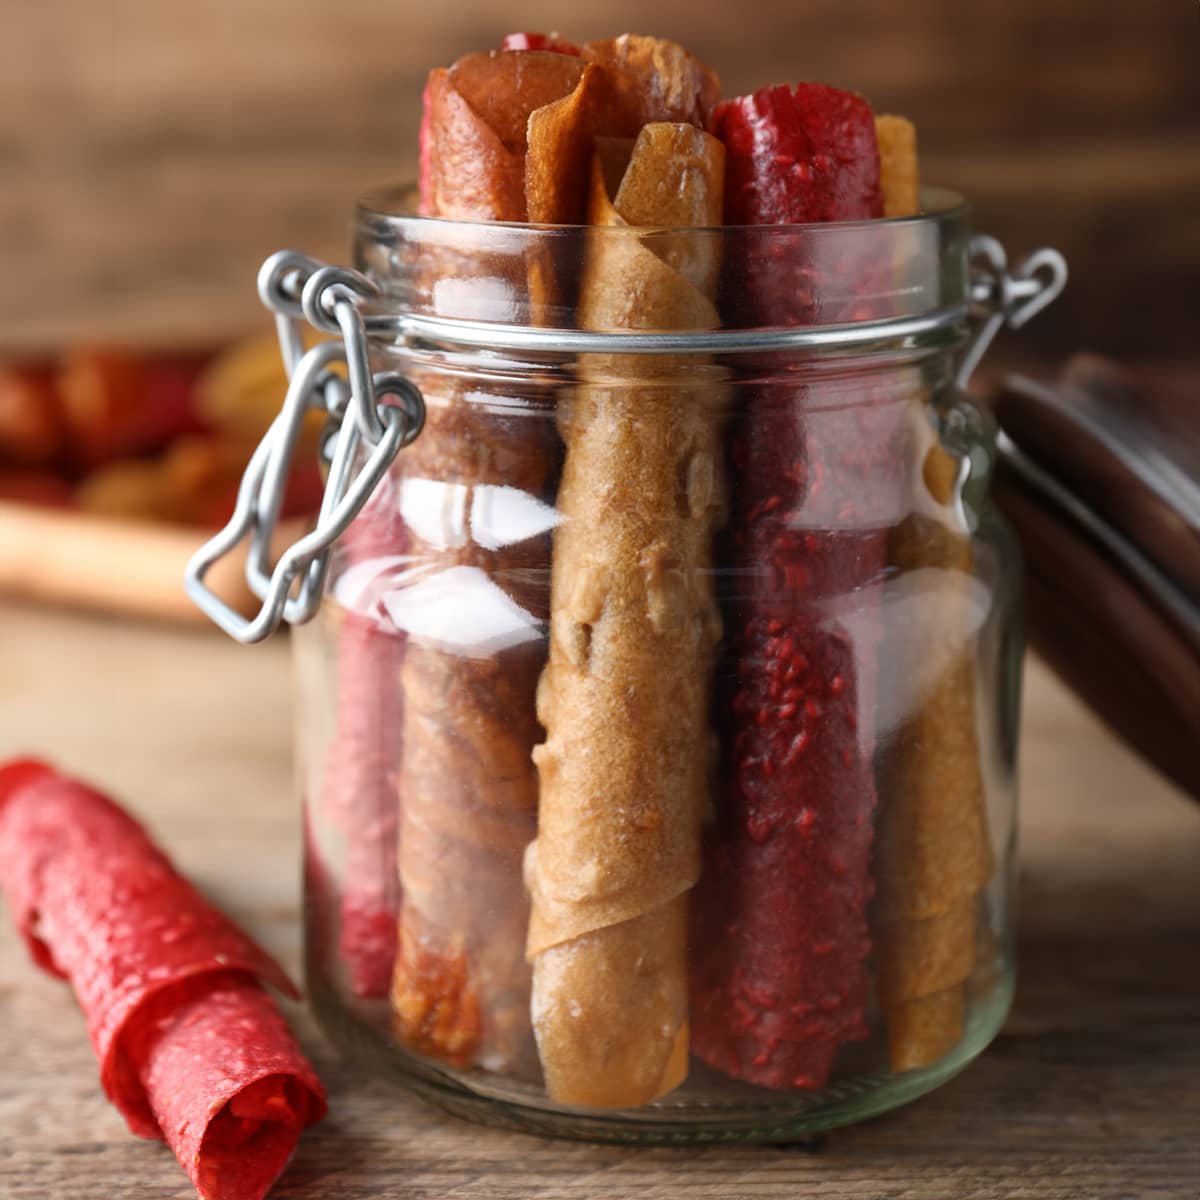 Fruit leather in a jar